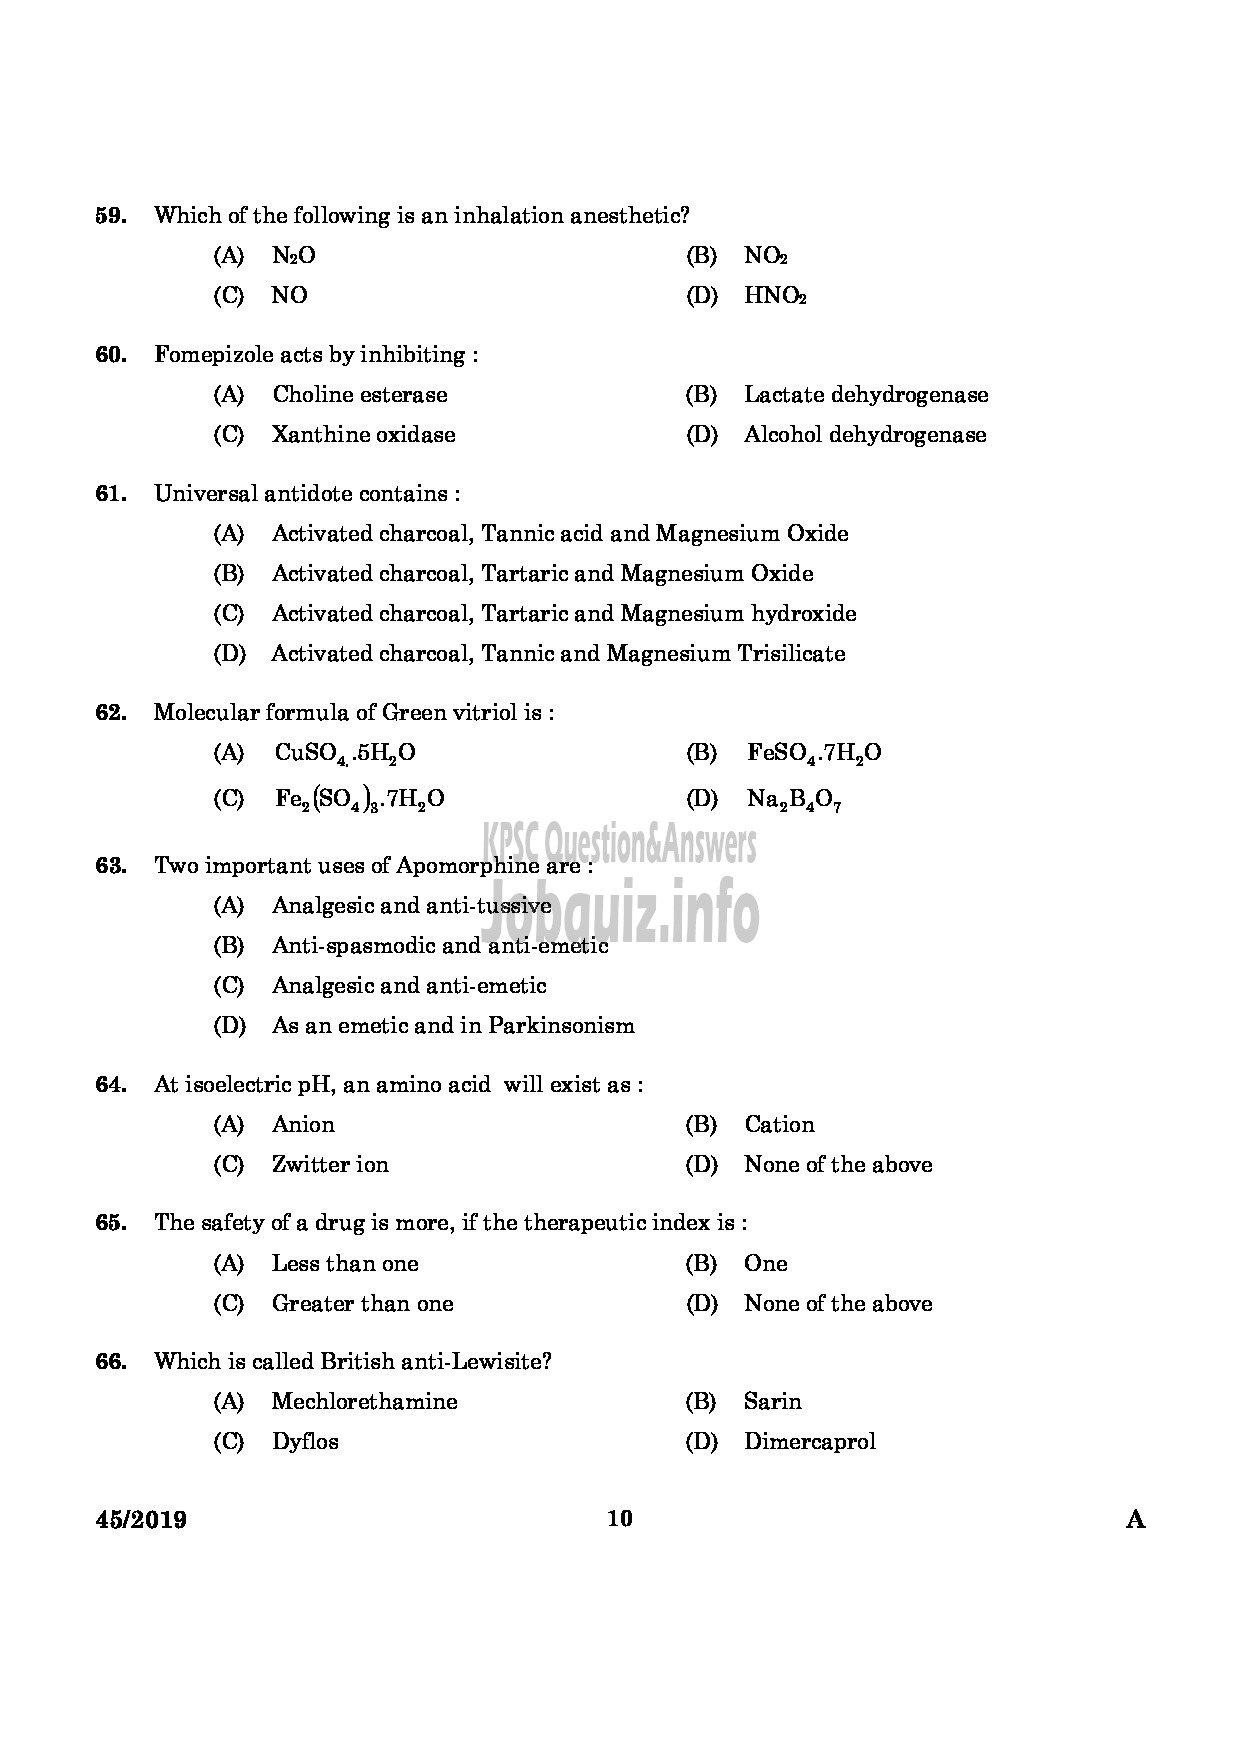 Kerala PSC Question Paper - Pharmacist Gr II Health Services/IMS English -8